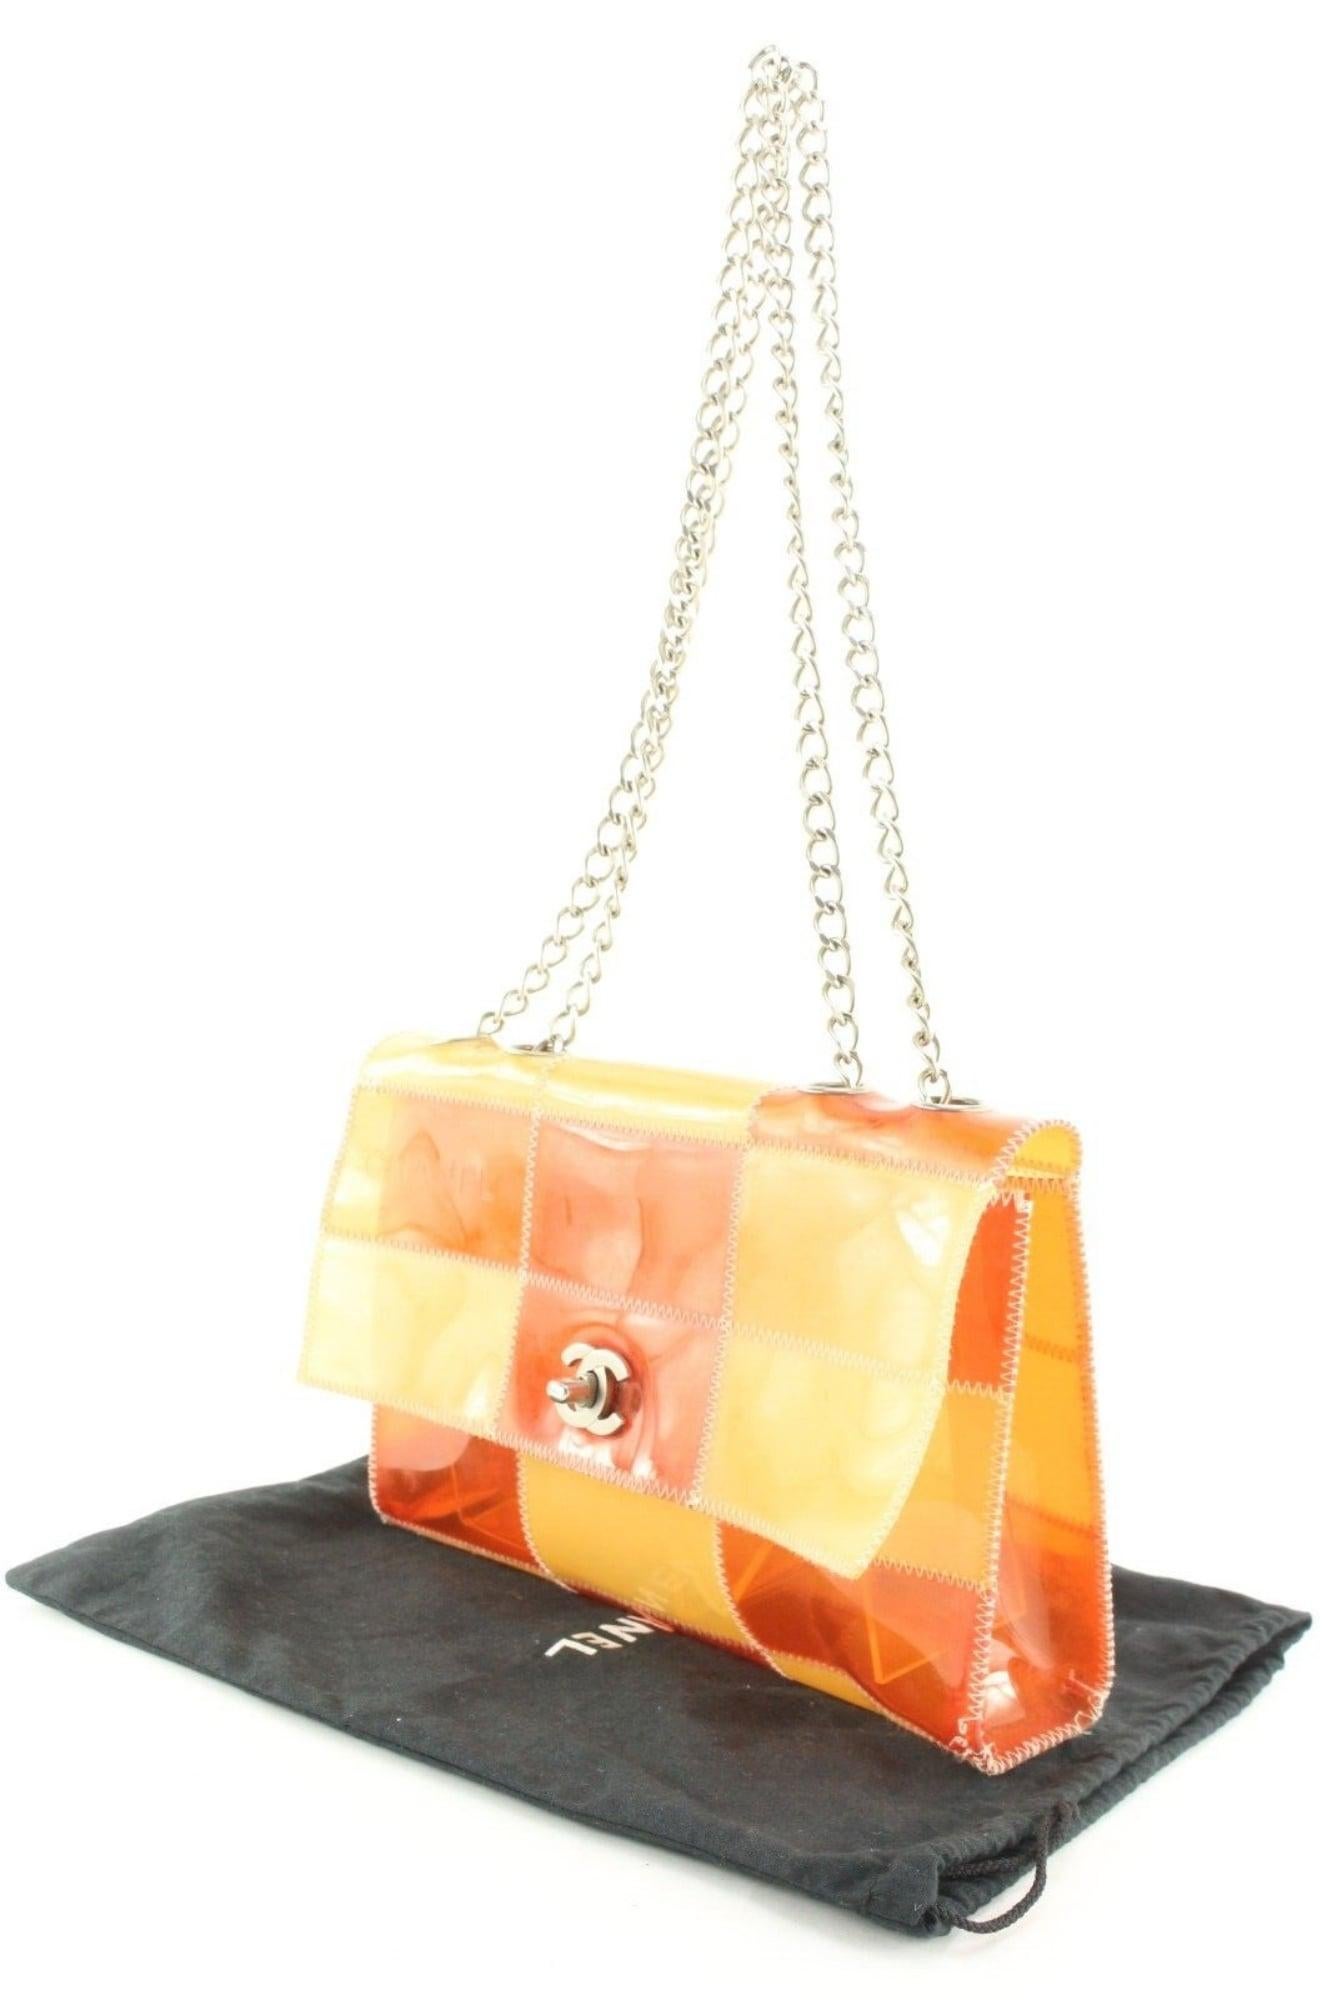 Chanel Clear Patchwork Classic Flap SHW Chain Bag 6CAS0419 For Sale 5